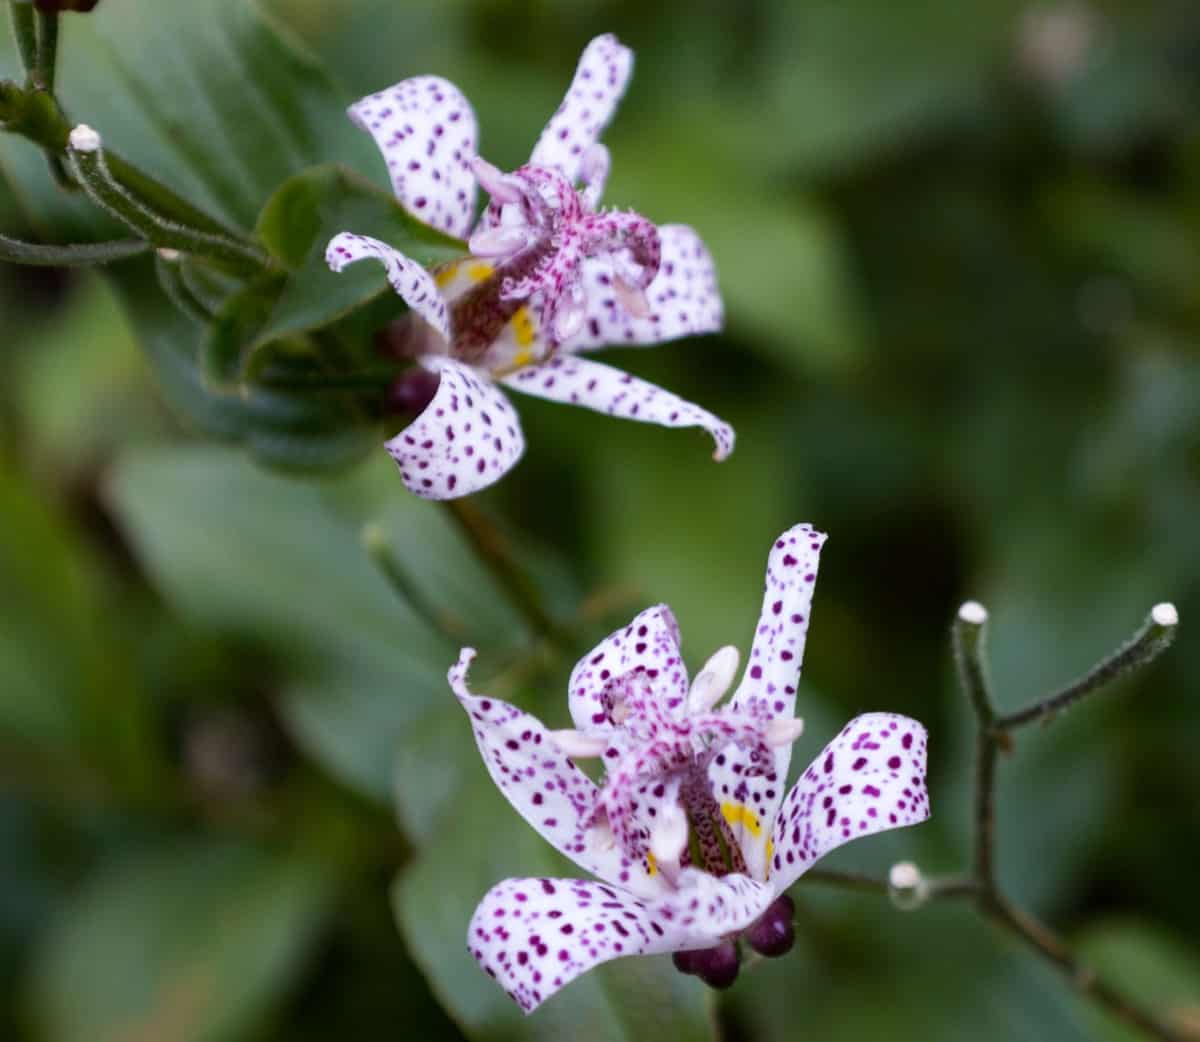 The Japanese toad lily has unusual-looking flowers.